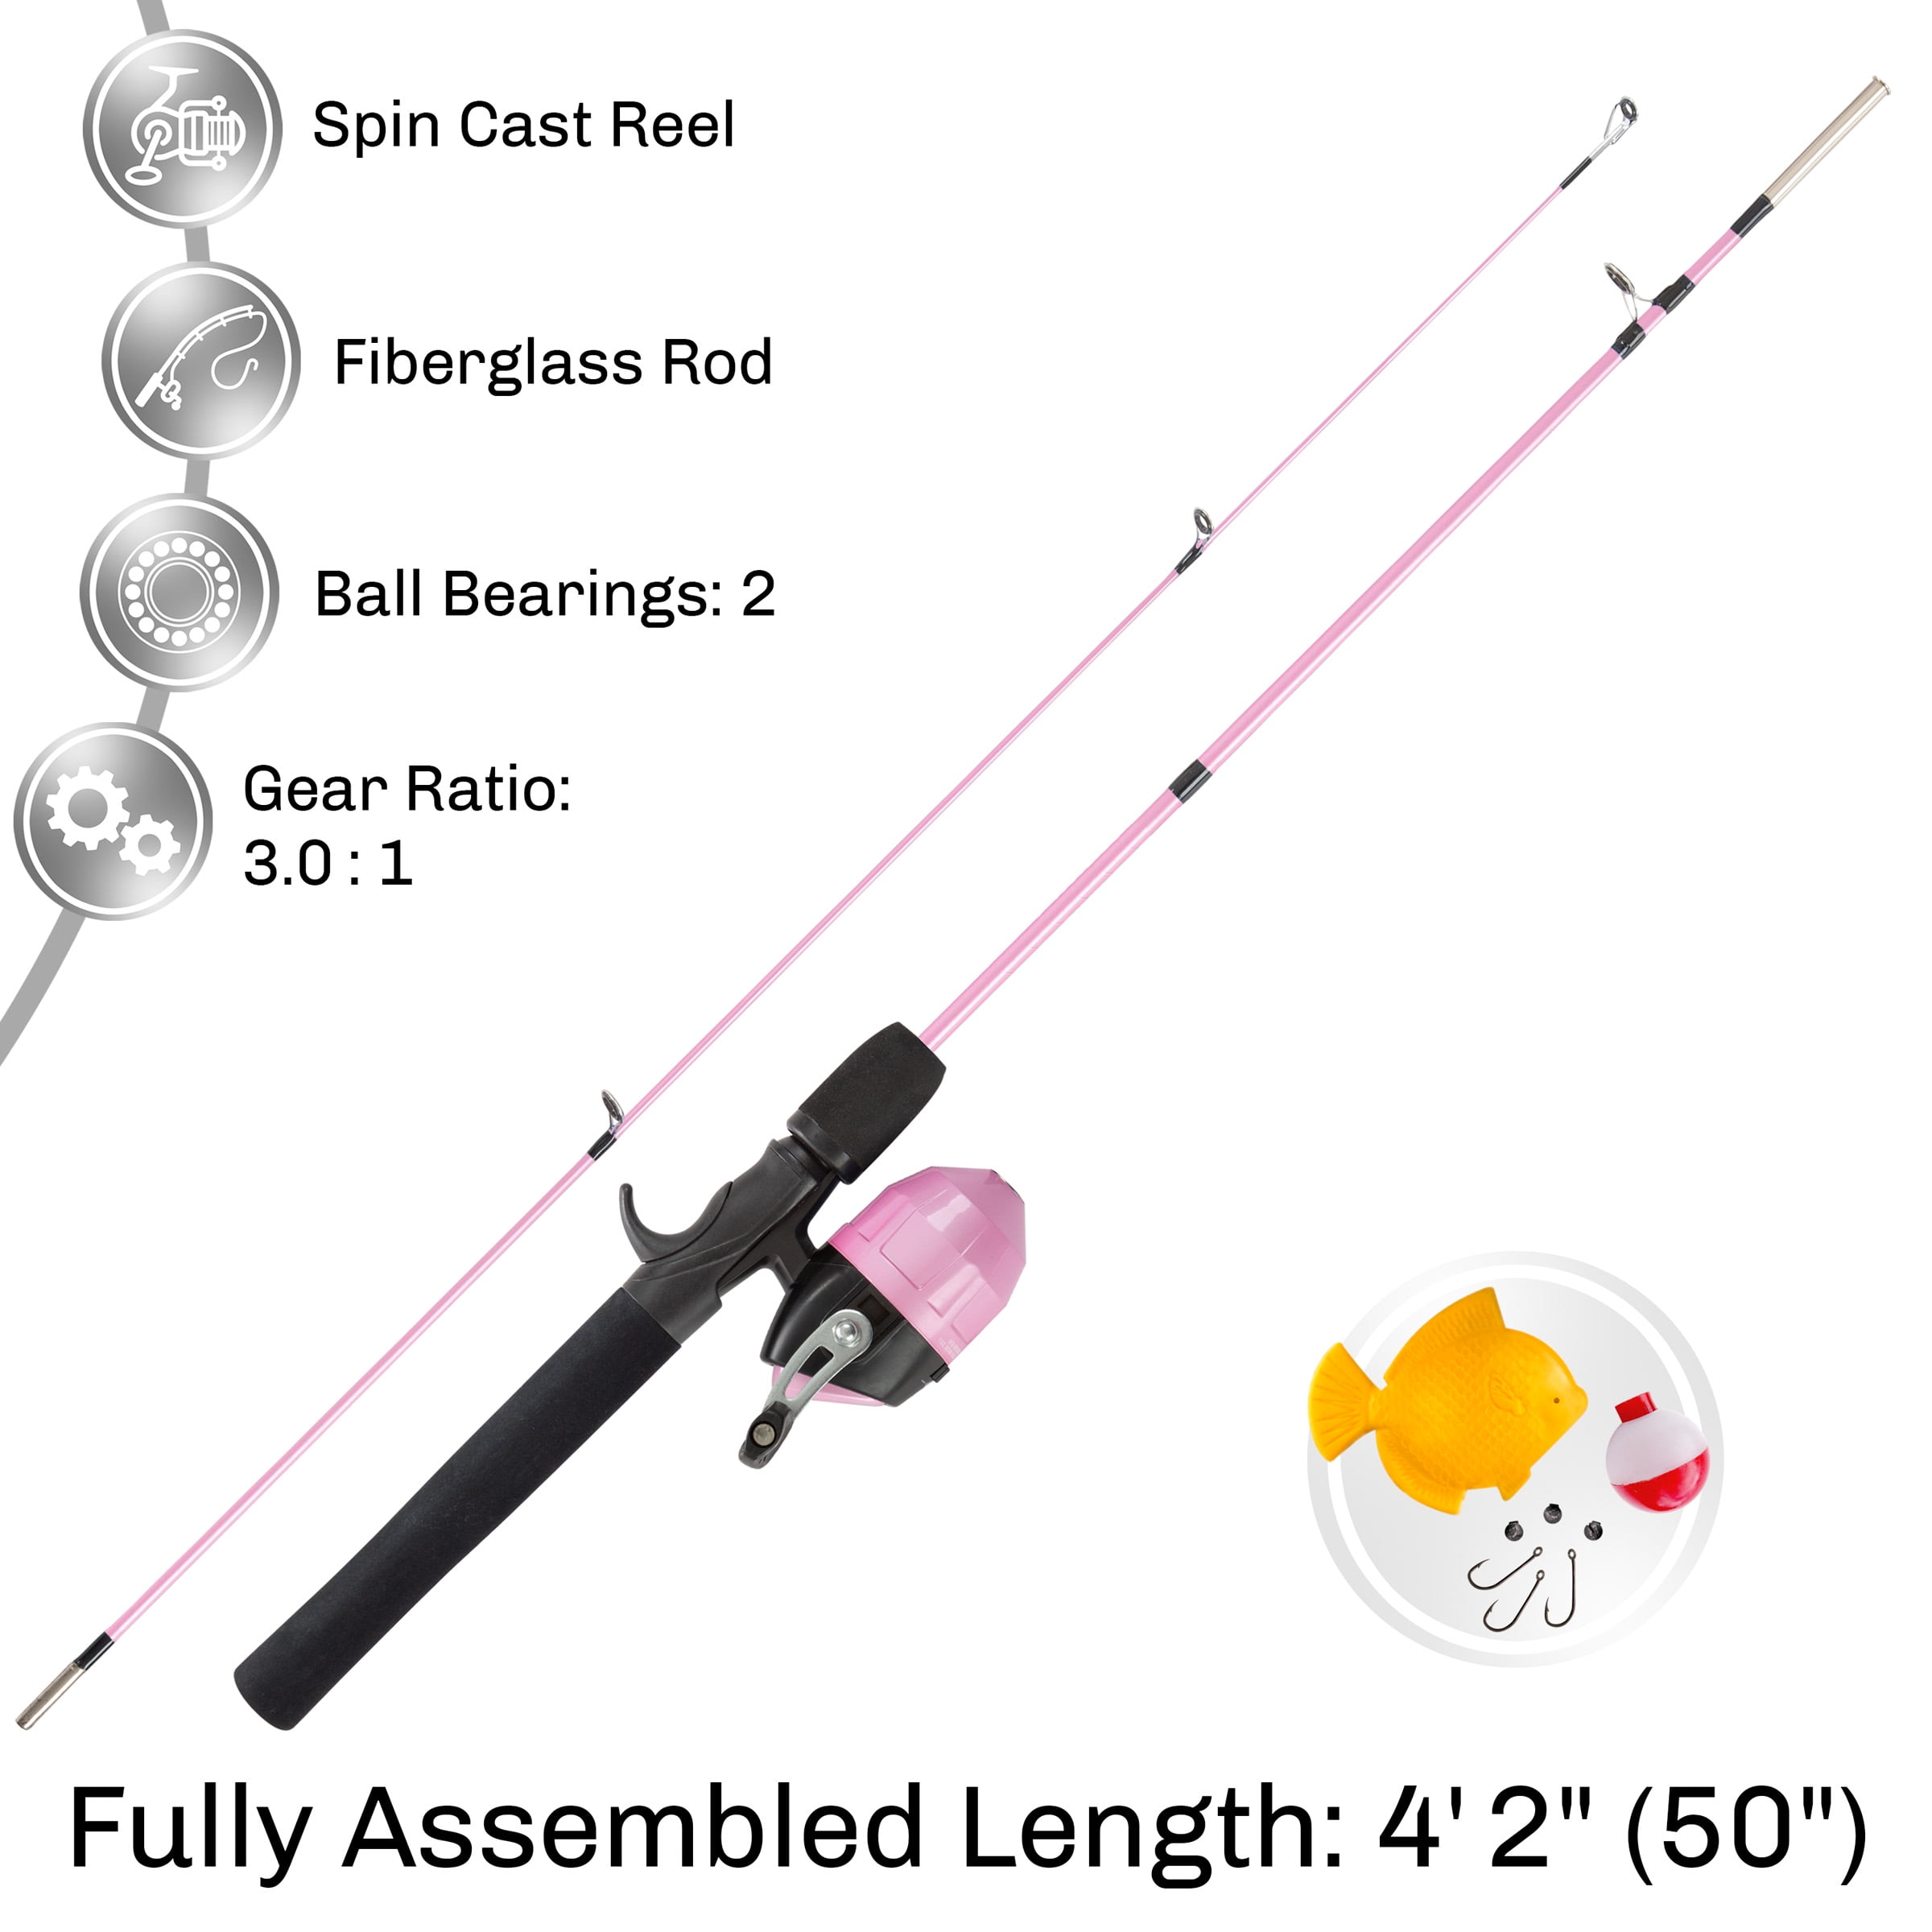 Urban Deco Kids Fishing Starter Kit - Rod and Reel Combos, Portable  Telescopic Fishing Rod with Tackle Box for Boys,Girls,Youth,Beginner - Pink,  Spinning Combos -  Canada